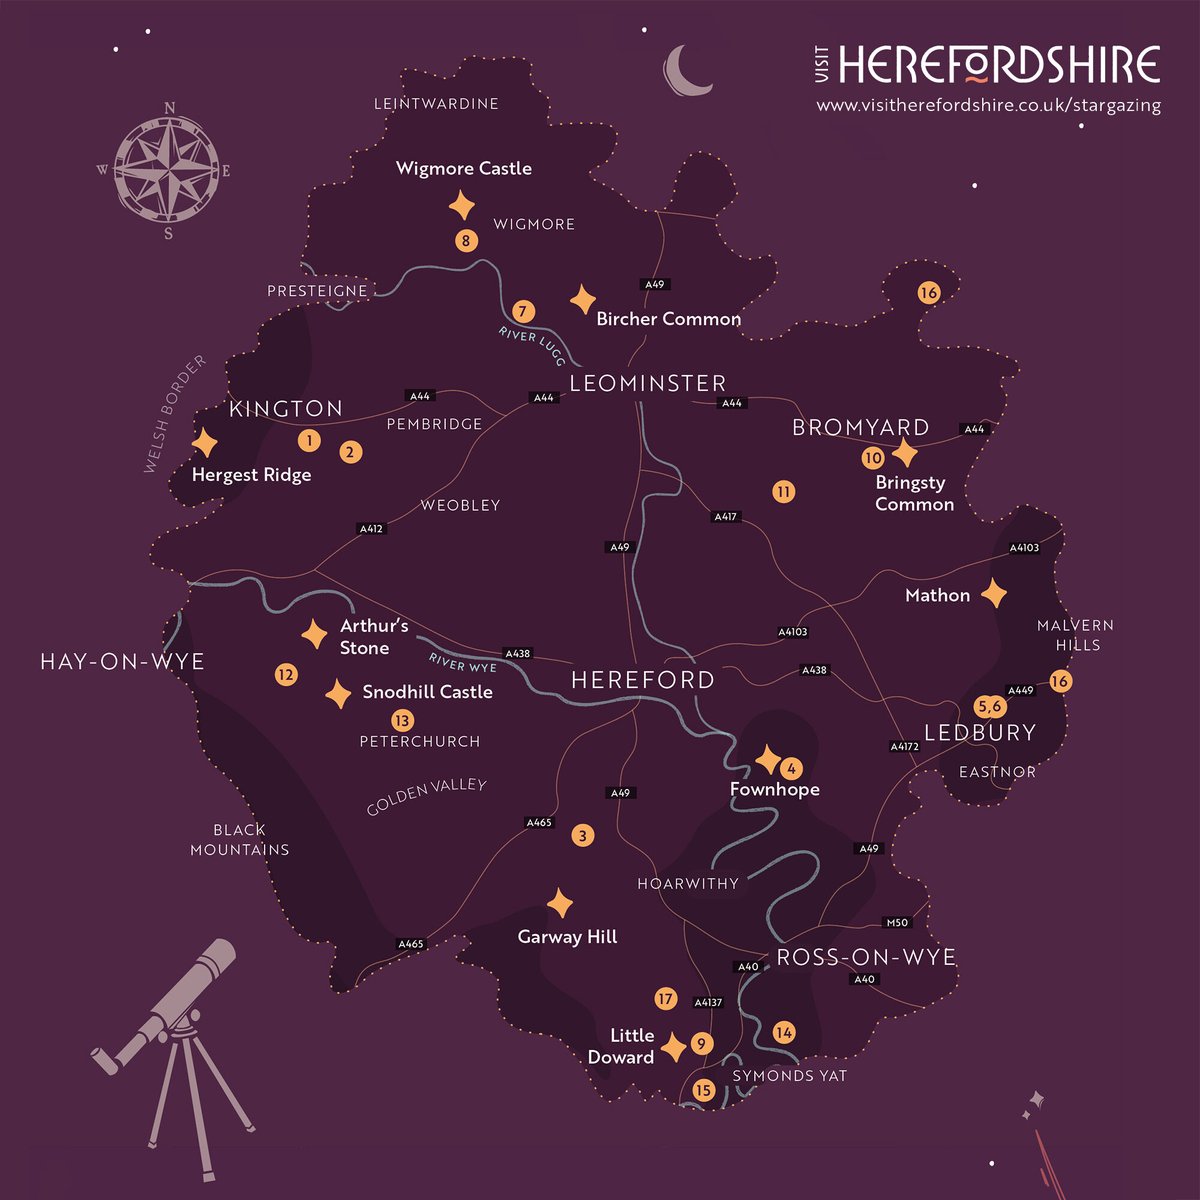 Stargazing in Herefordshire is fantastic! Download the Stargazers' Guide to Herefordshire: visitherefordshire.co.uk/trip-ideas/our… #visitherefordshire #herefordshirecountybid #exploreherefordshire #stargazing #astrotourism #astronomers #nightskies #moonbathing